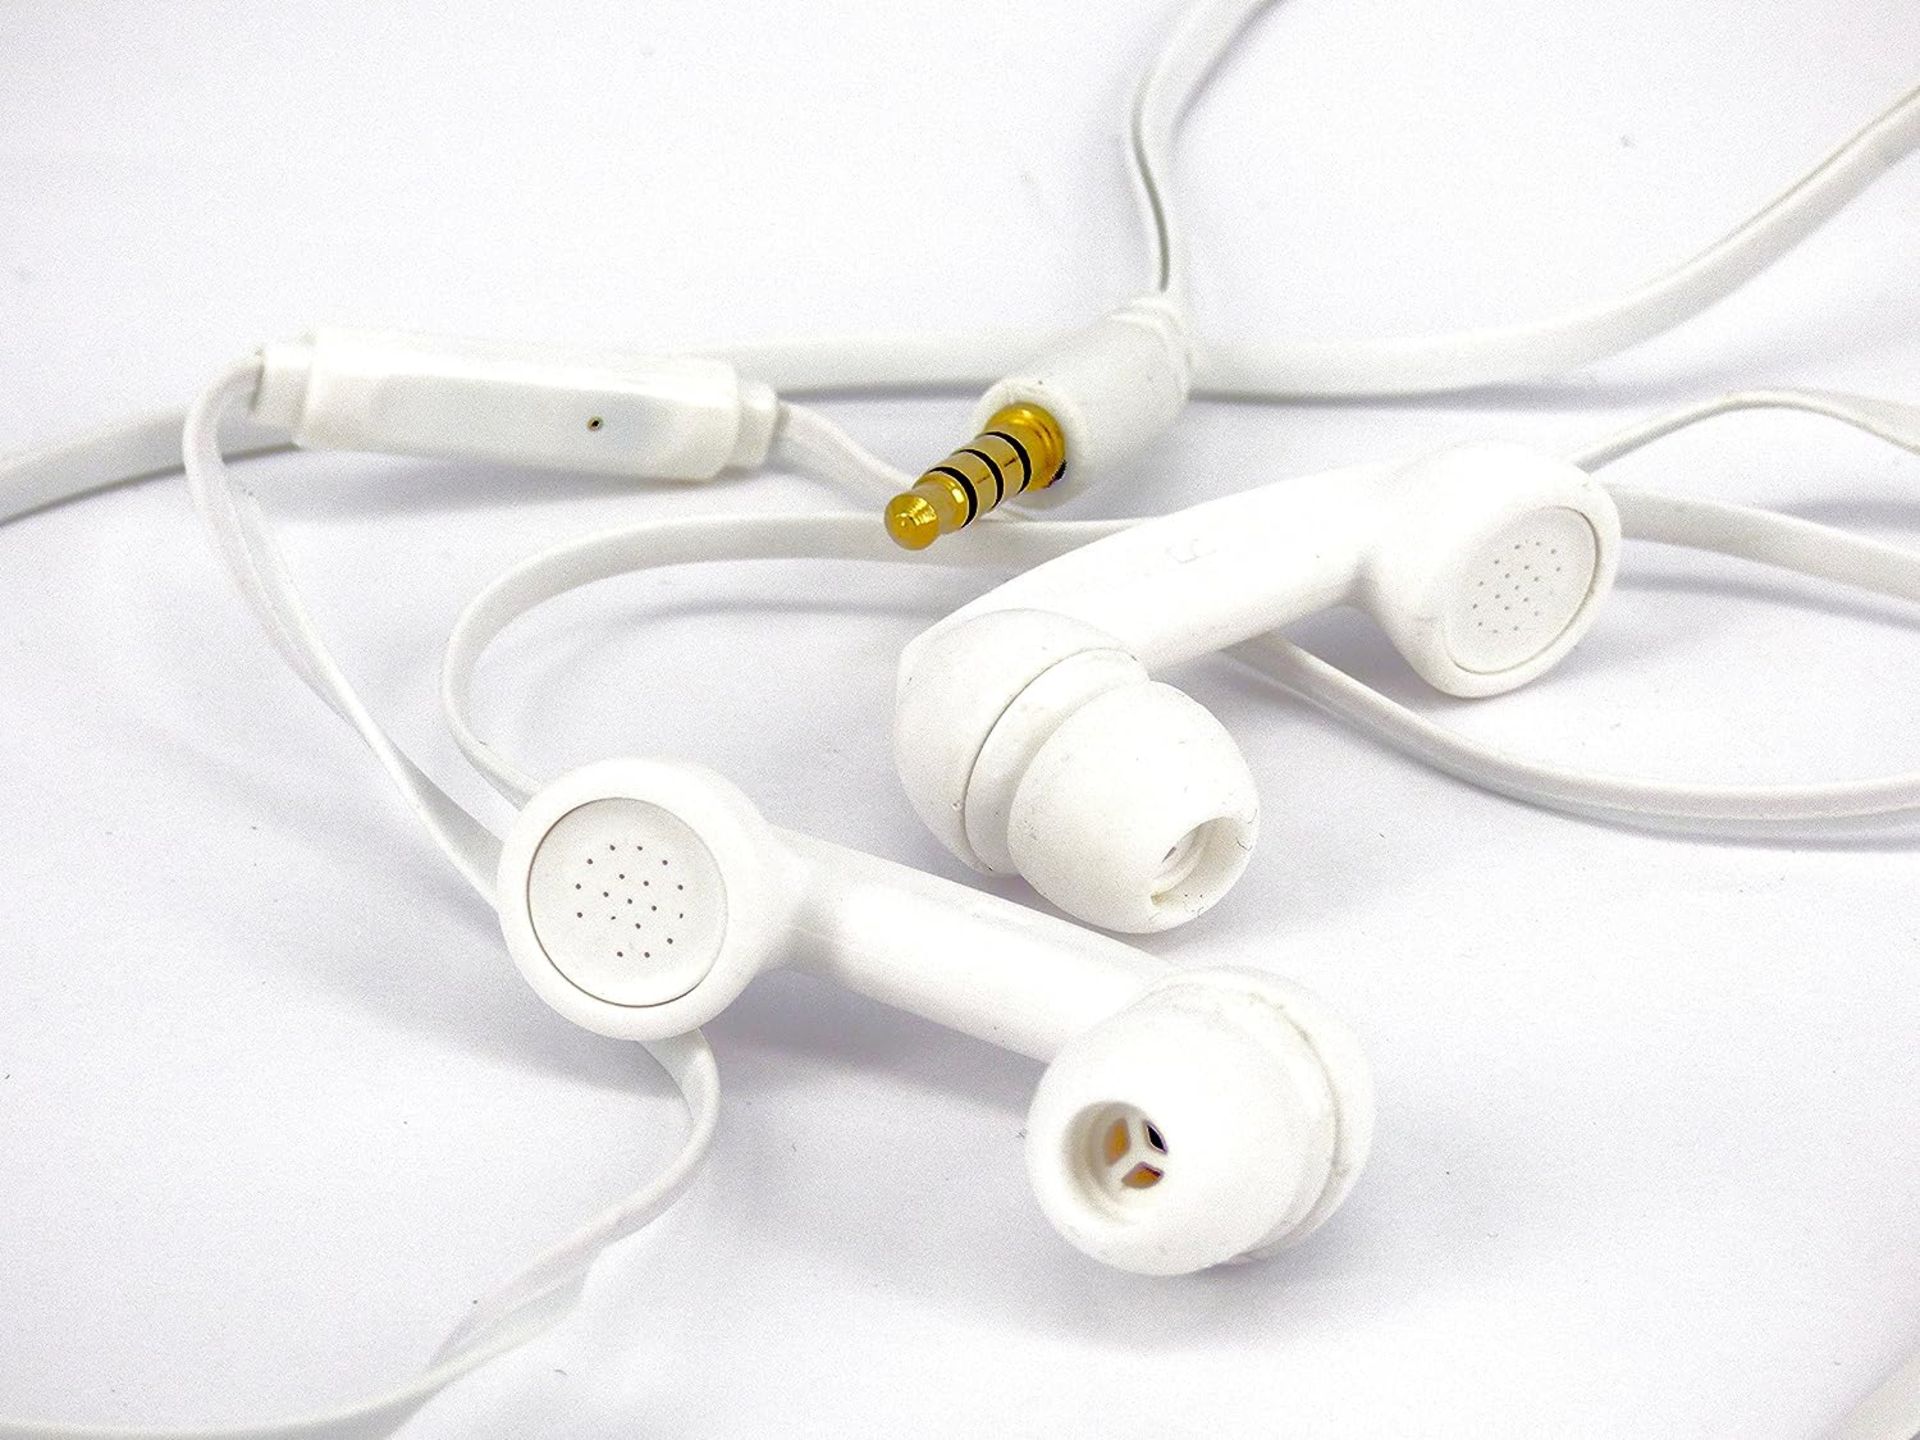 48 x Telephone Earphones with Microphone  - (NEW) - RRP Â£430.56 ! - Image 6 of 9